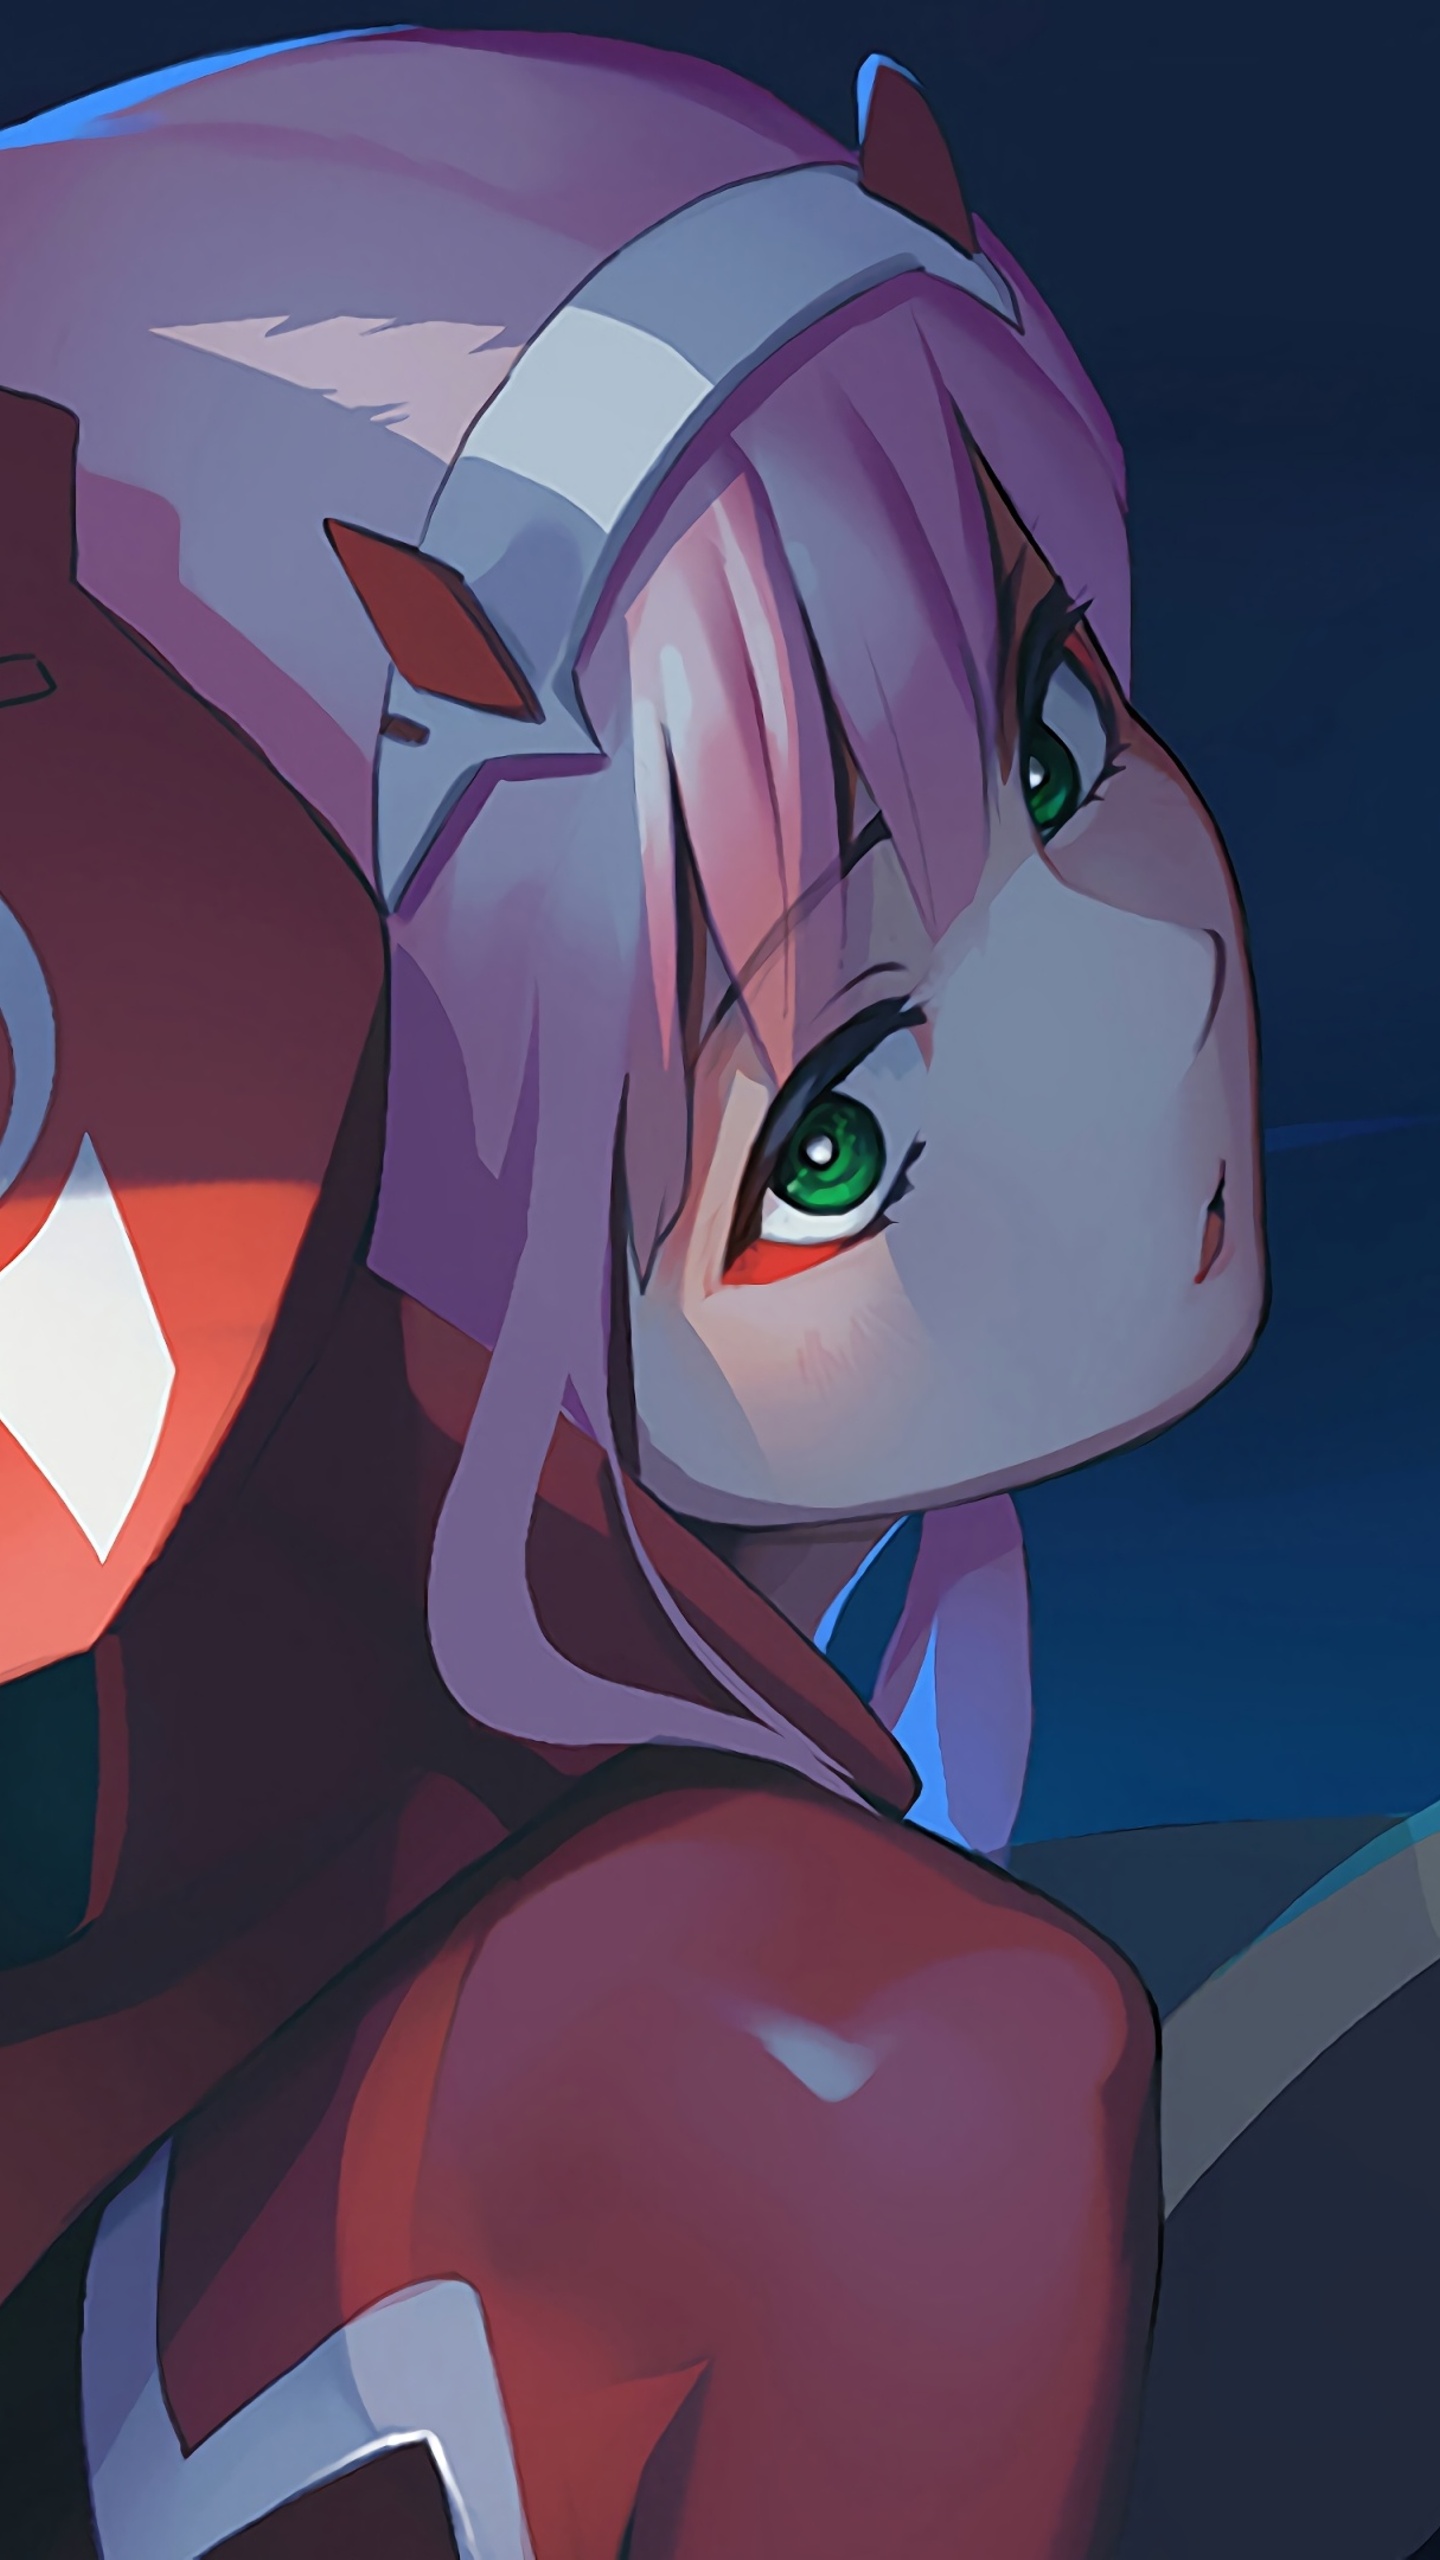 Zero Two Wallpaper Cute / 1440x2960 Zero Two Darling In The Franxx Samsung Galaxy ... - Check out this fantastic collection of zero two wallpapers, with 53 zero two background images for your desktop, phone or tablet.